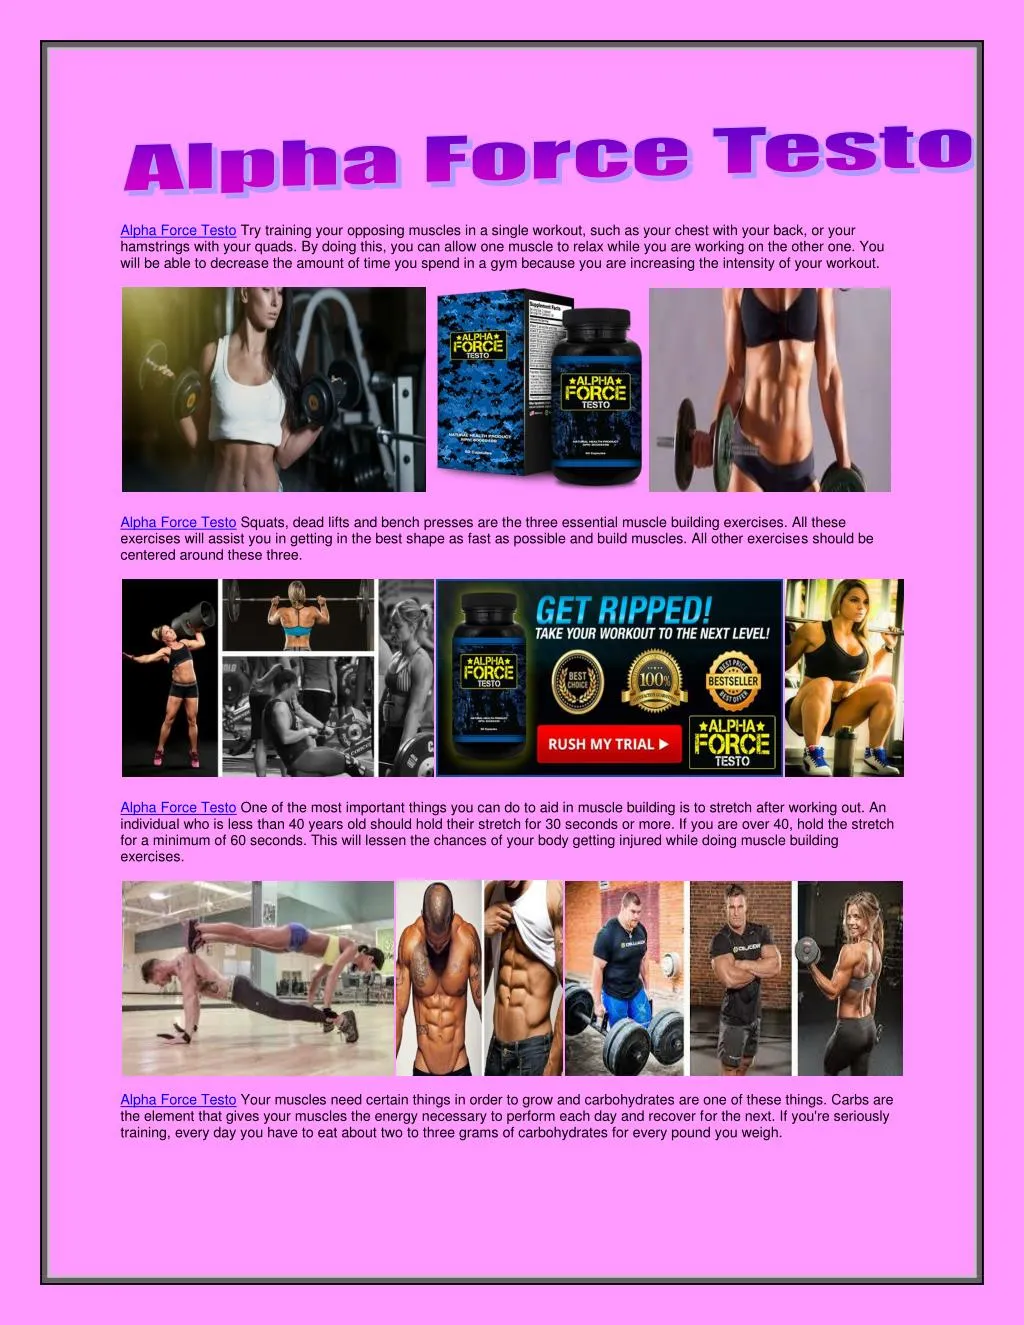 alpha force testo try training your opposing